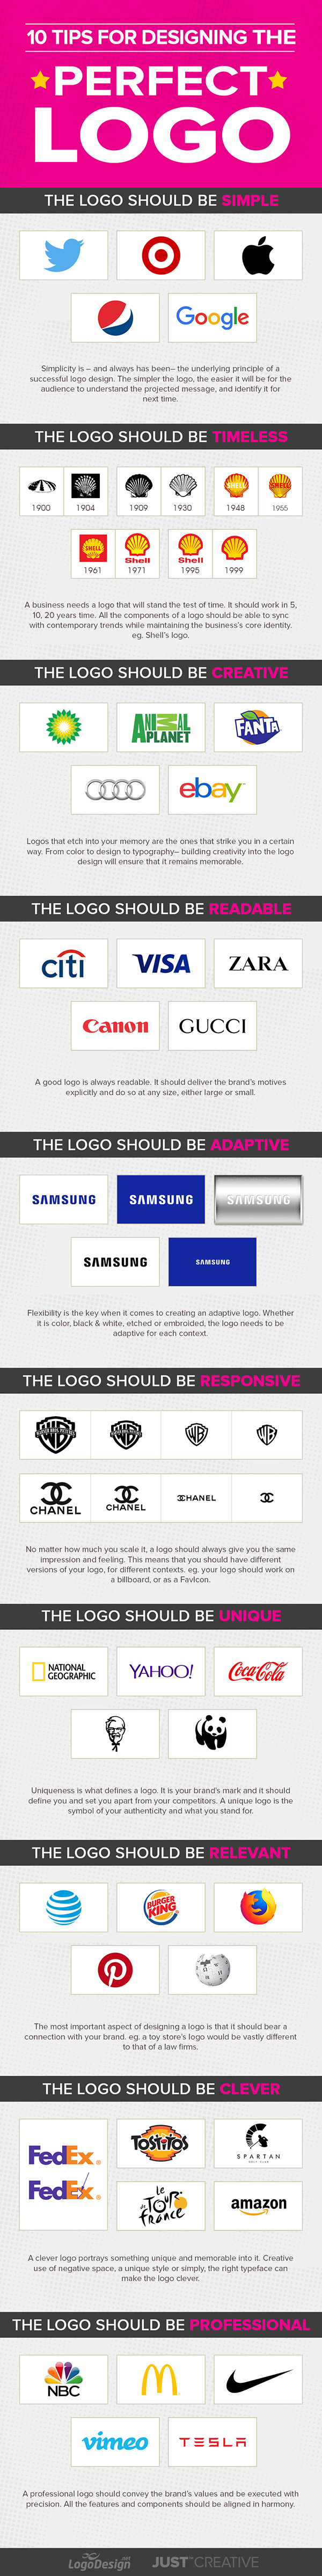 10 Tips for Designing The Perfect Logo